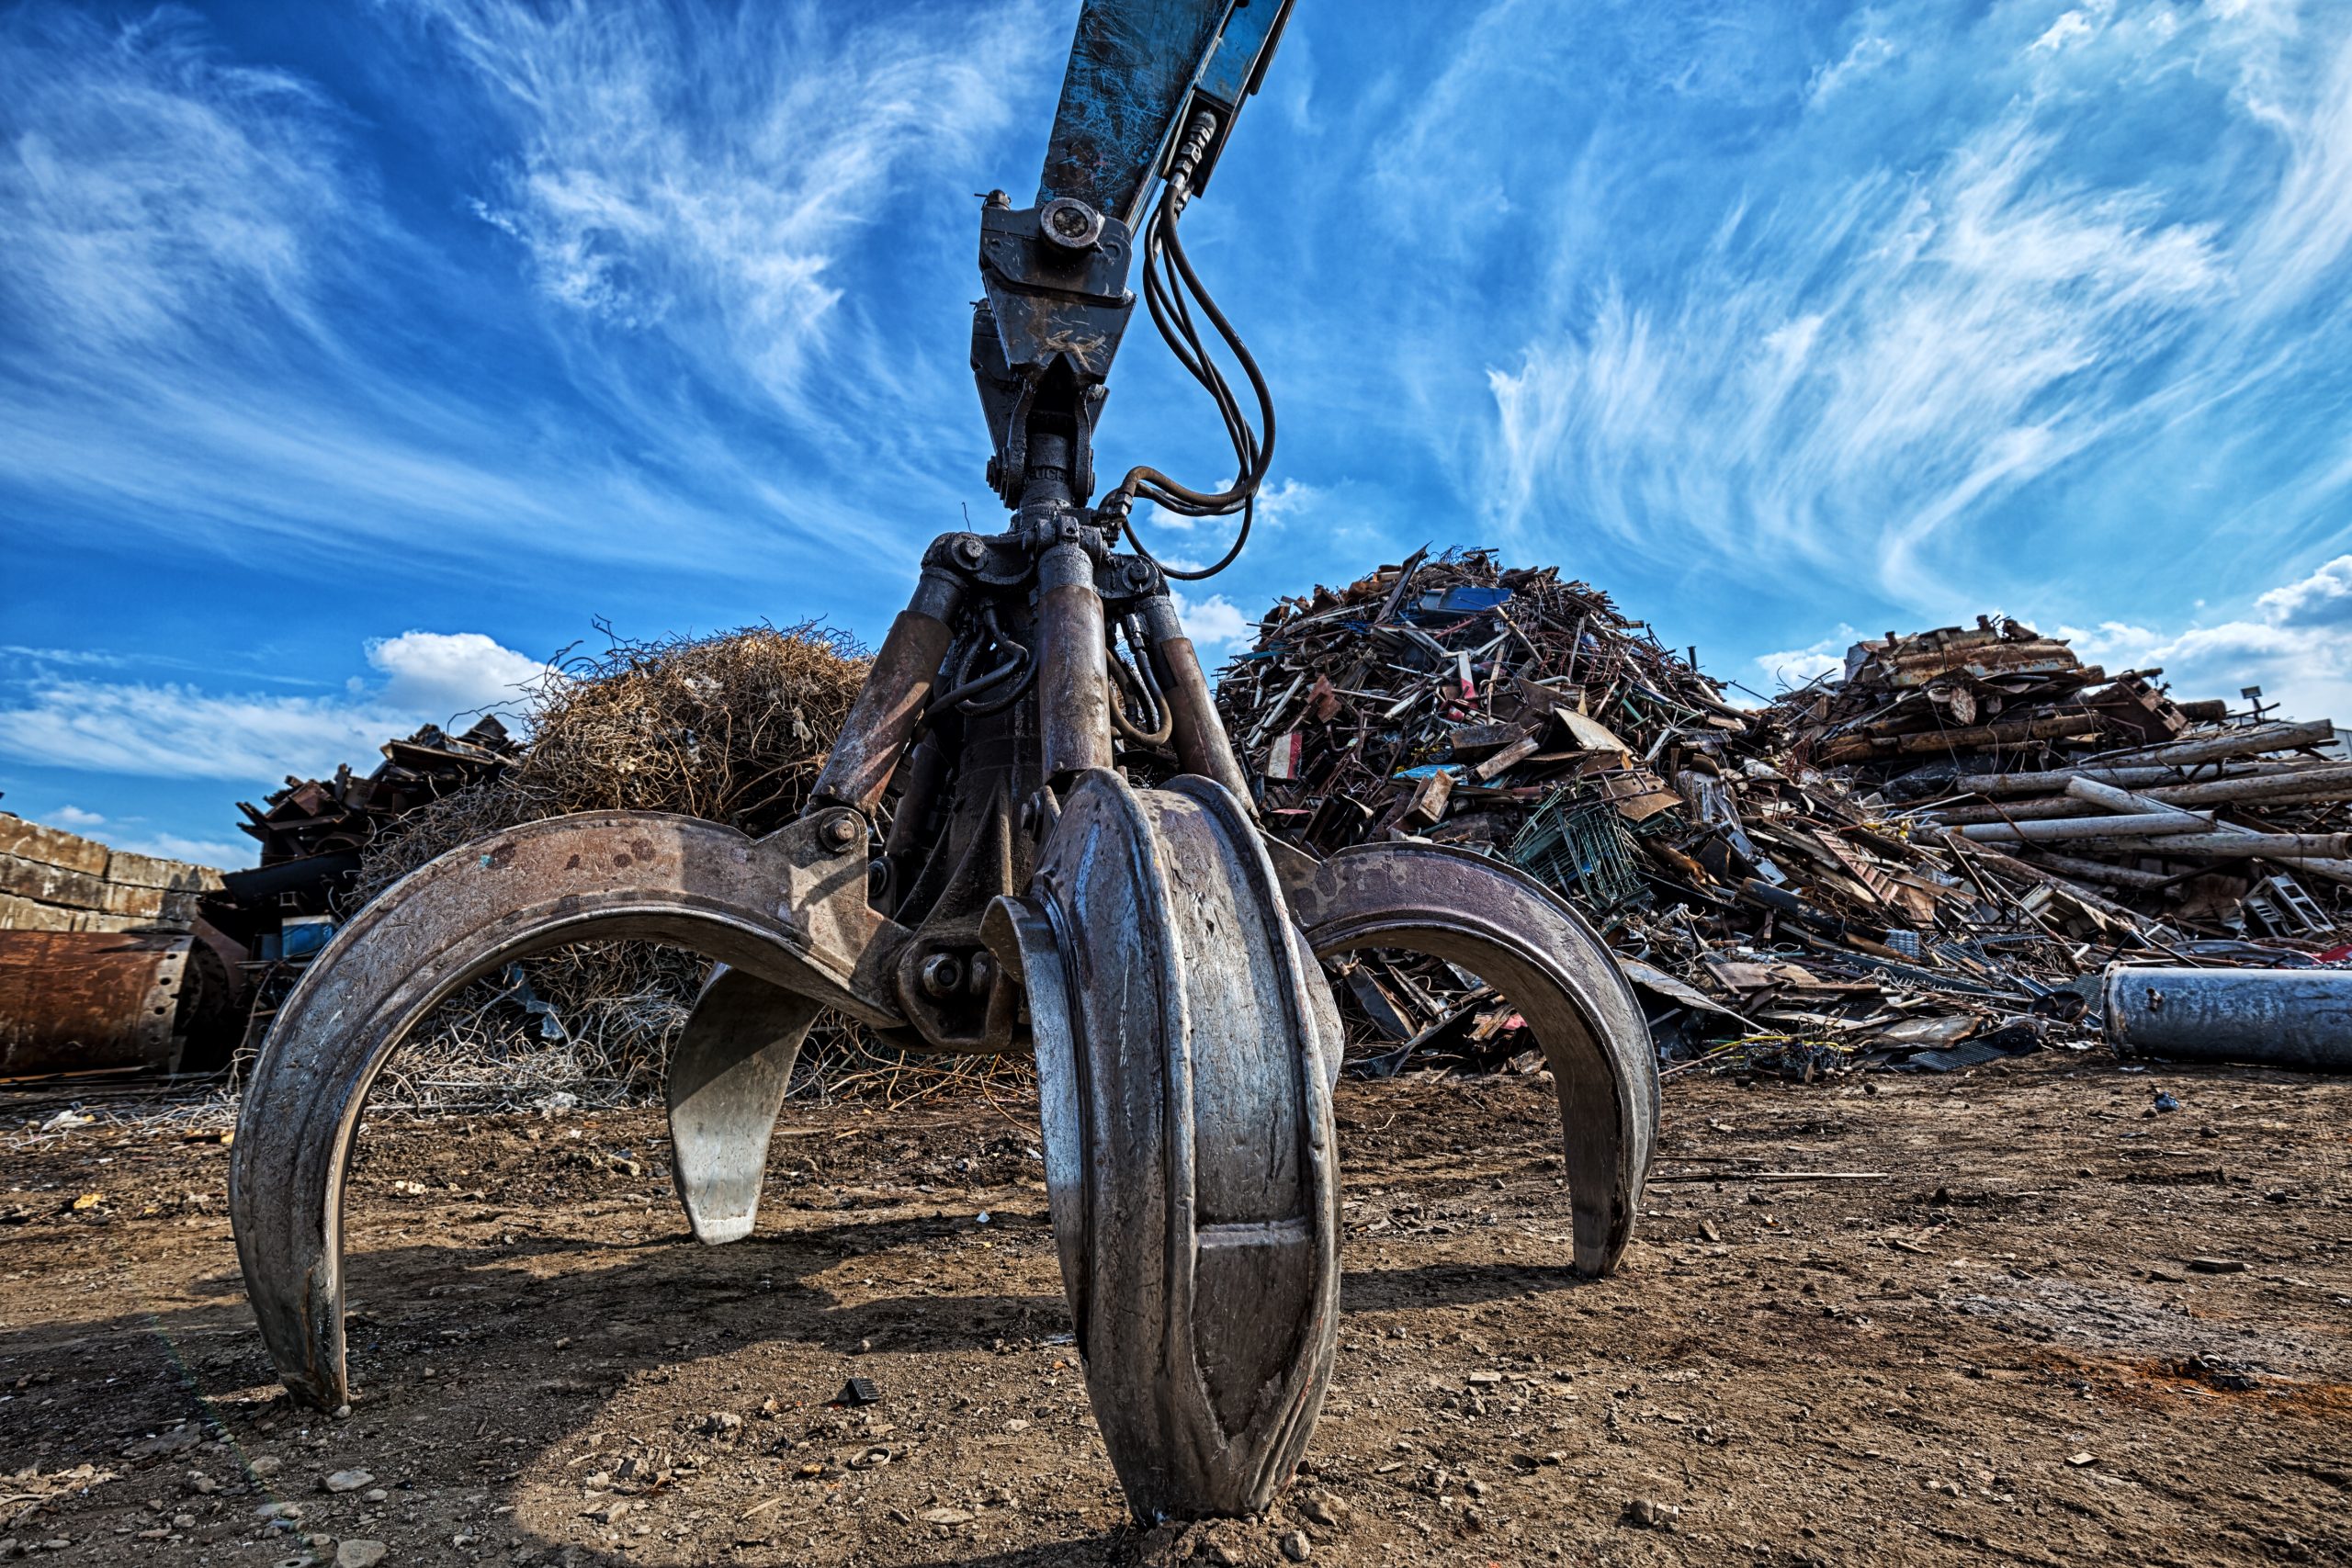 A gripper attached to an excavator with a pile of metal scrap in the background